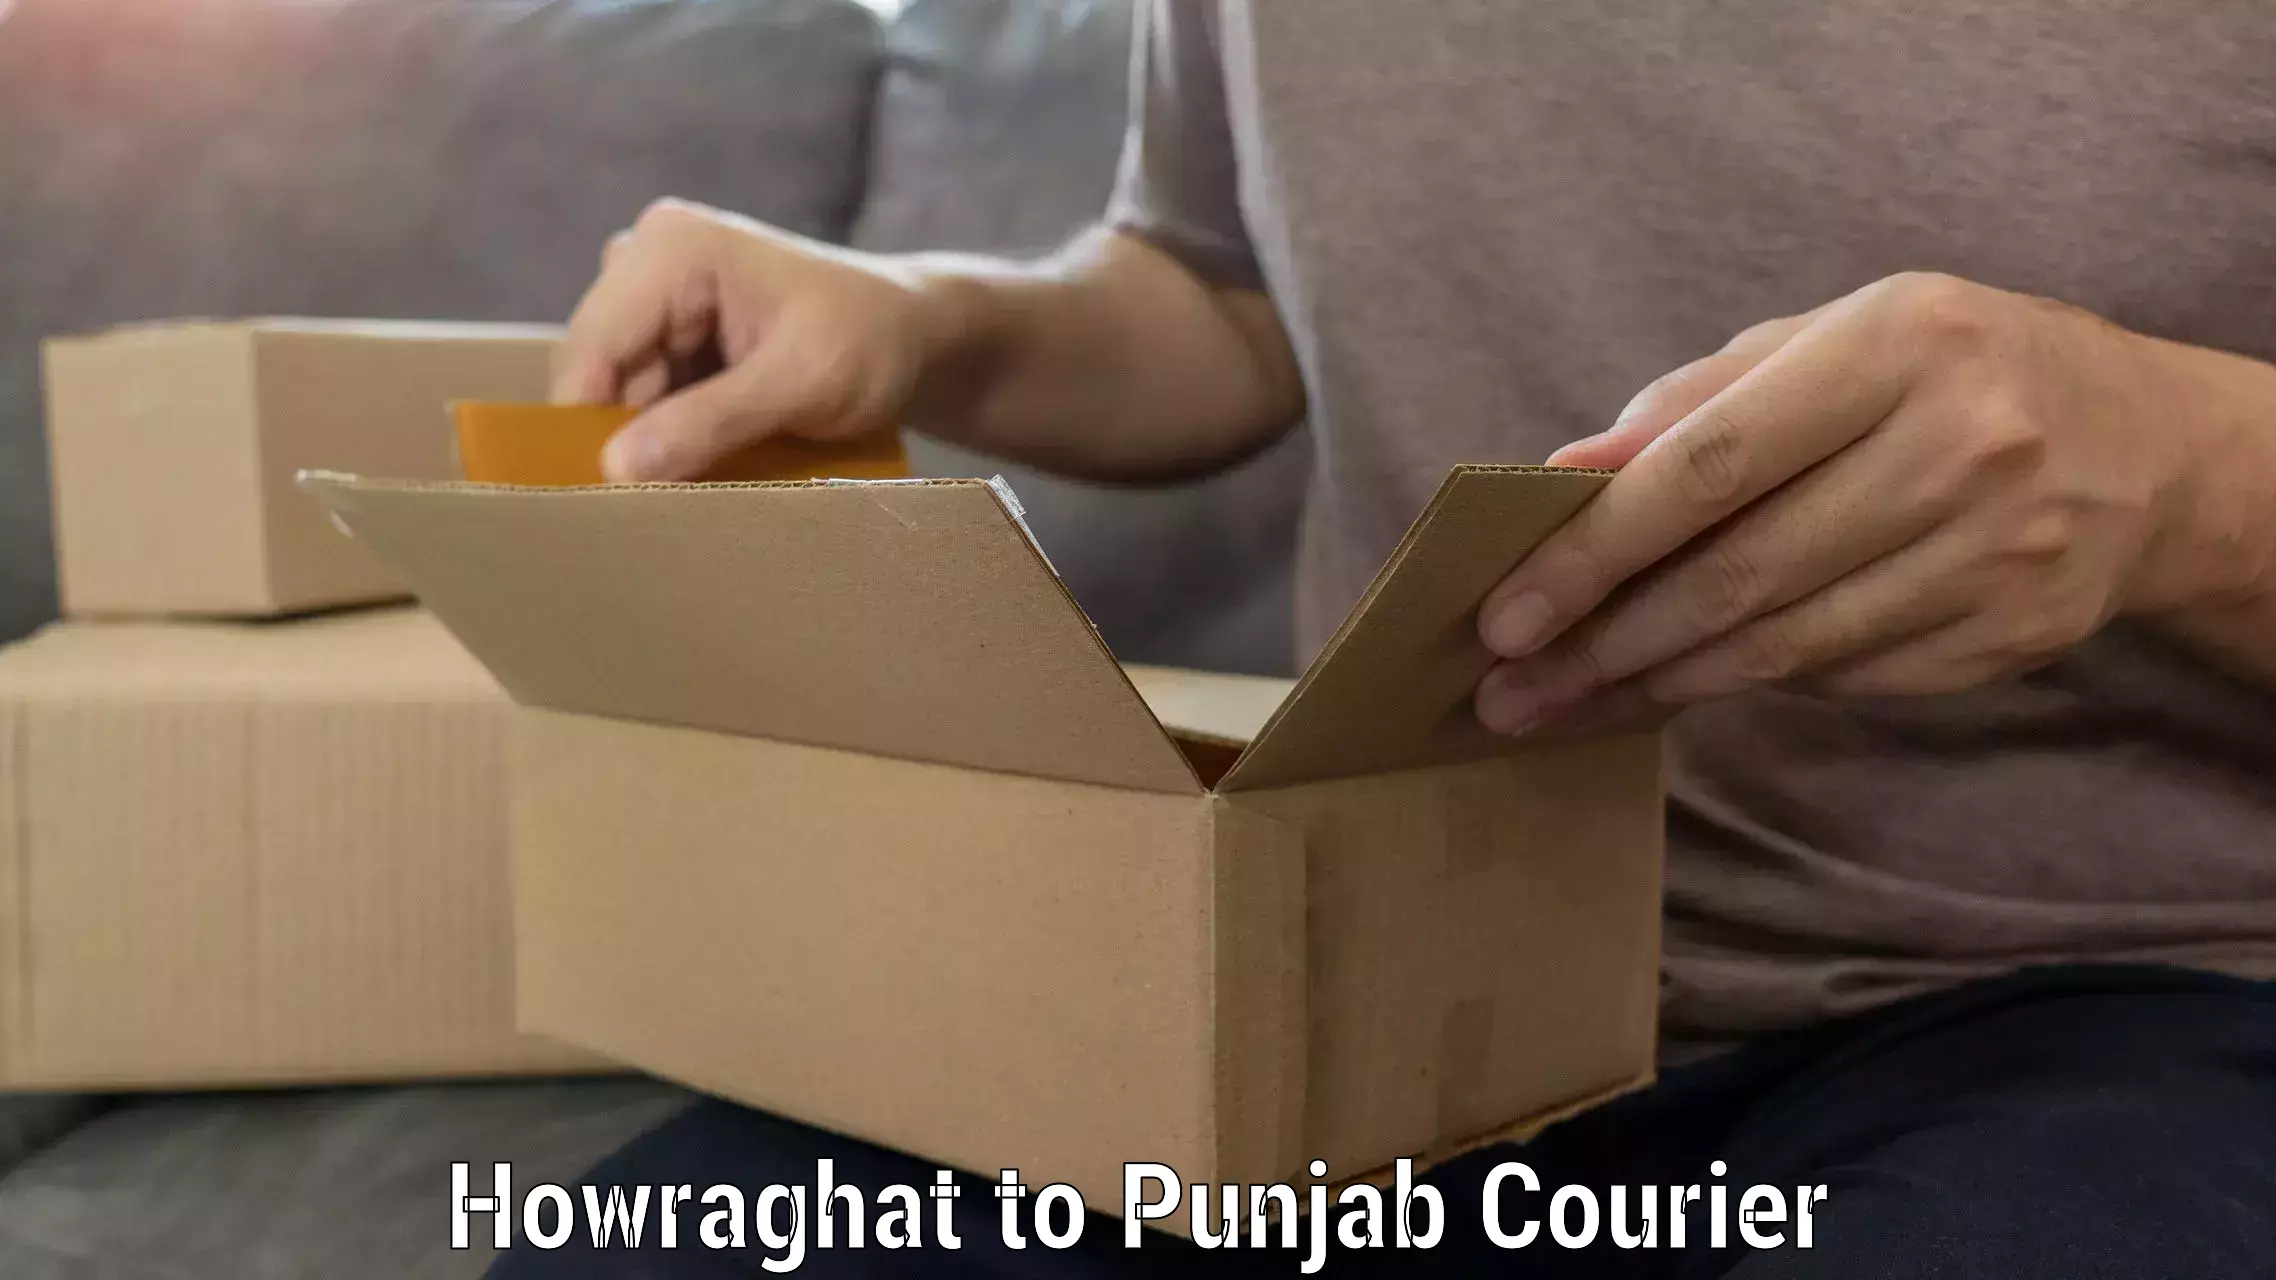 Professional relocation services Howraghat to Bagha Purana